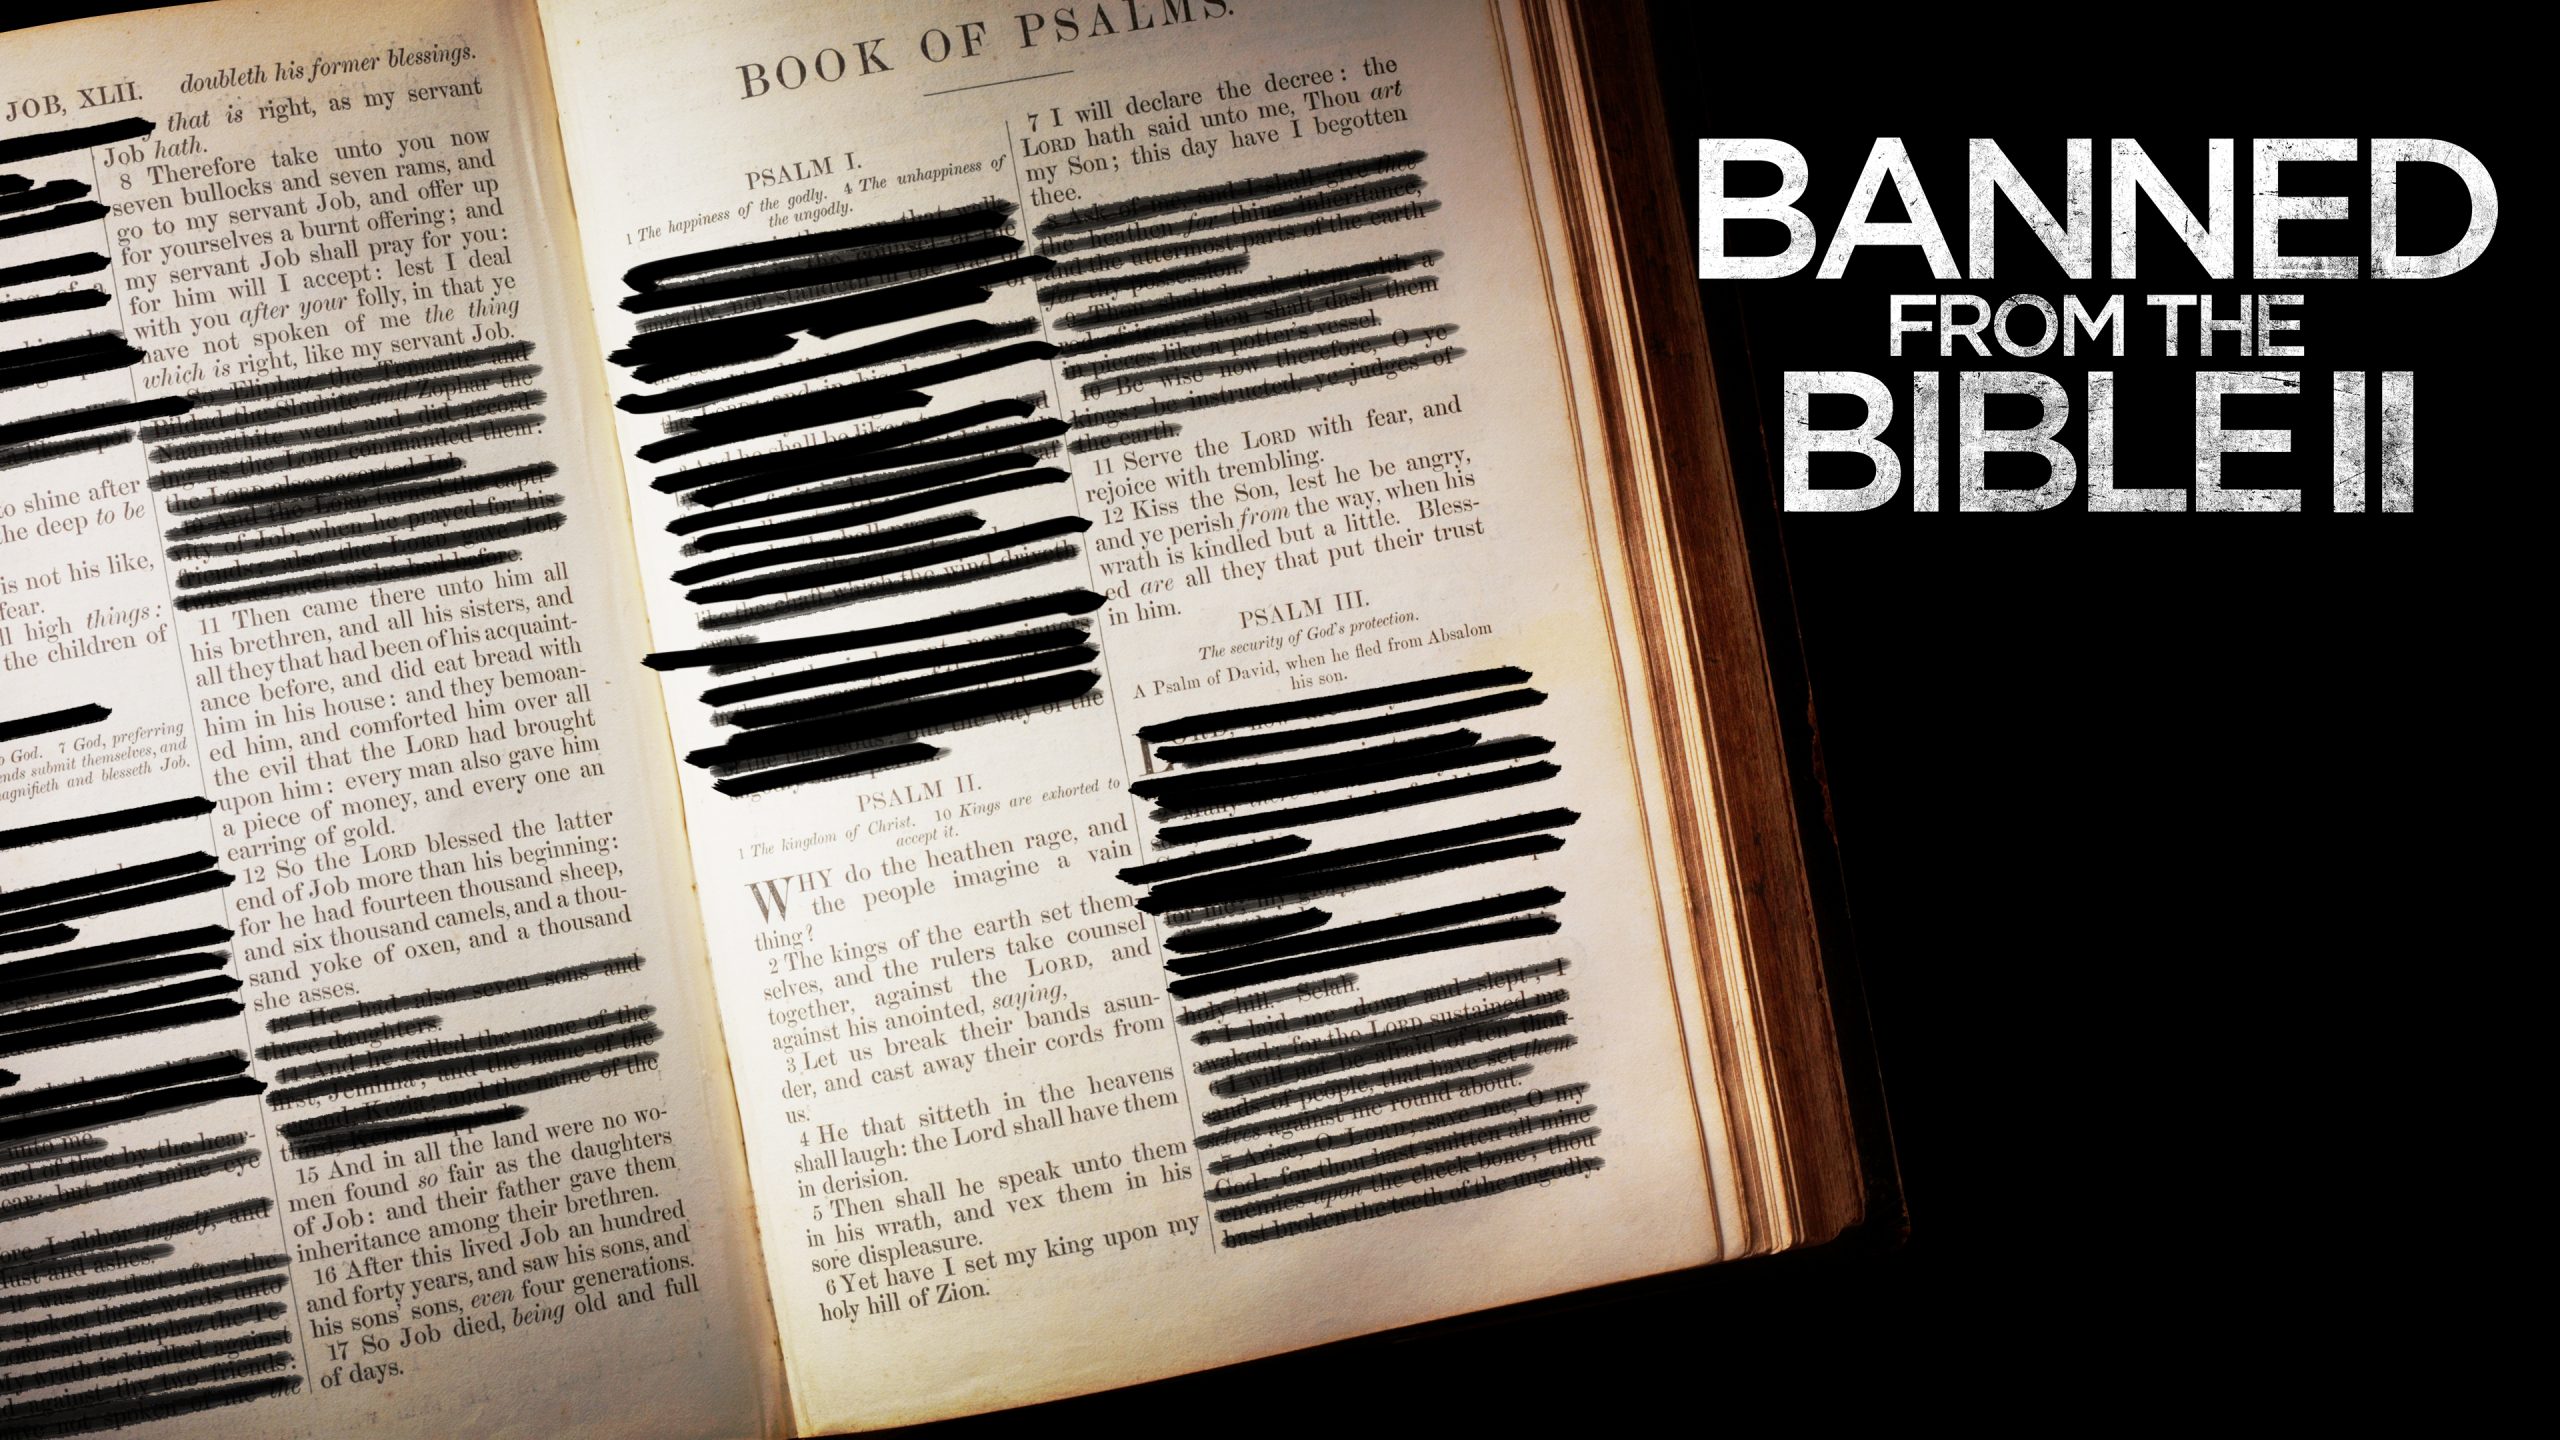 Banned From the Bible II